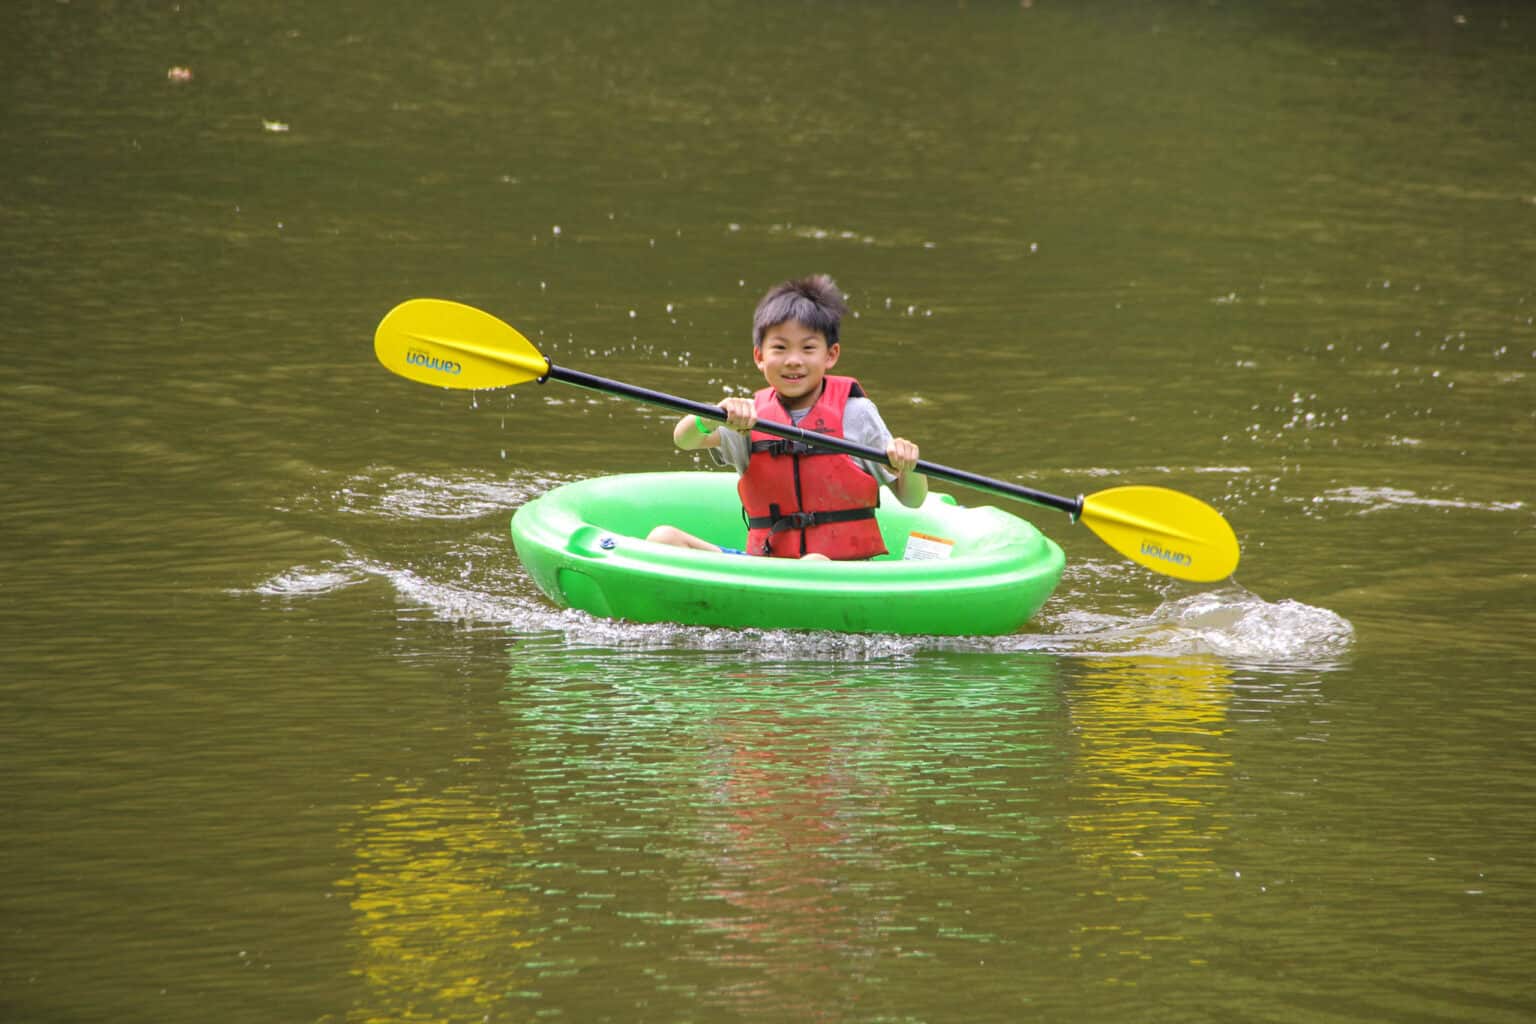 A young boy in Iowa is paddling a raft at summer camp.